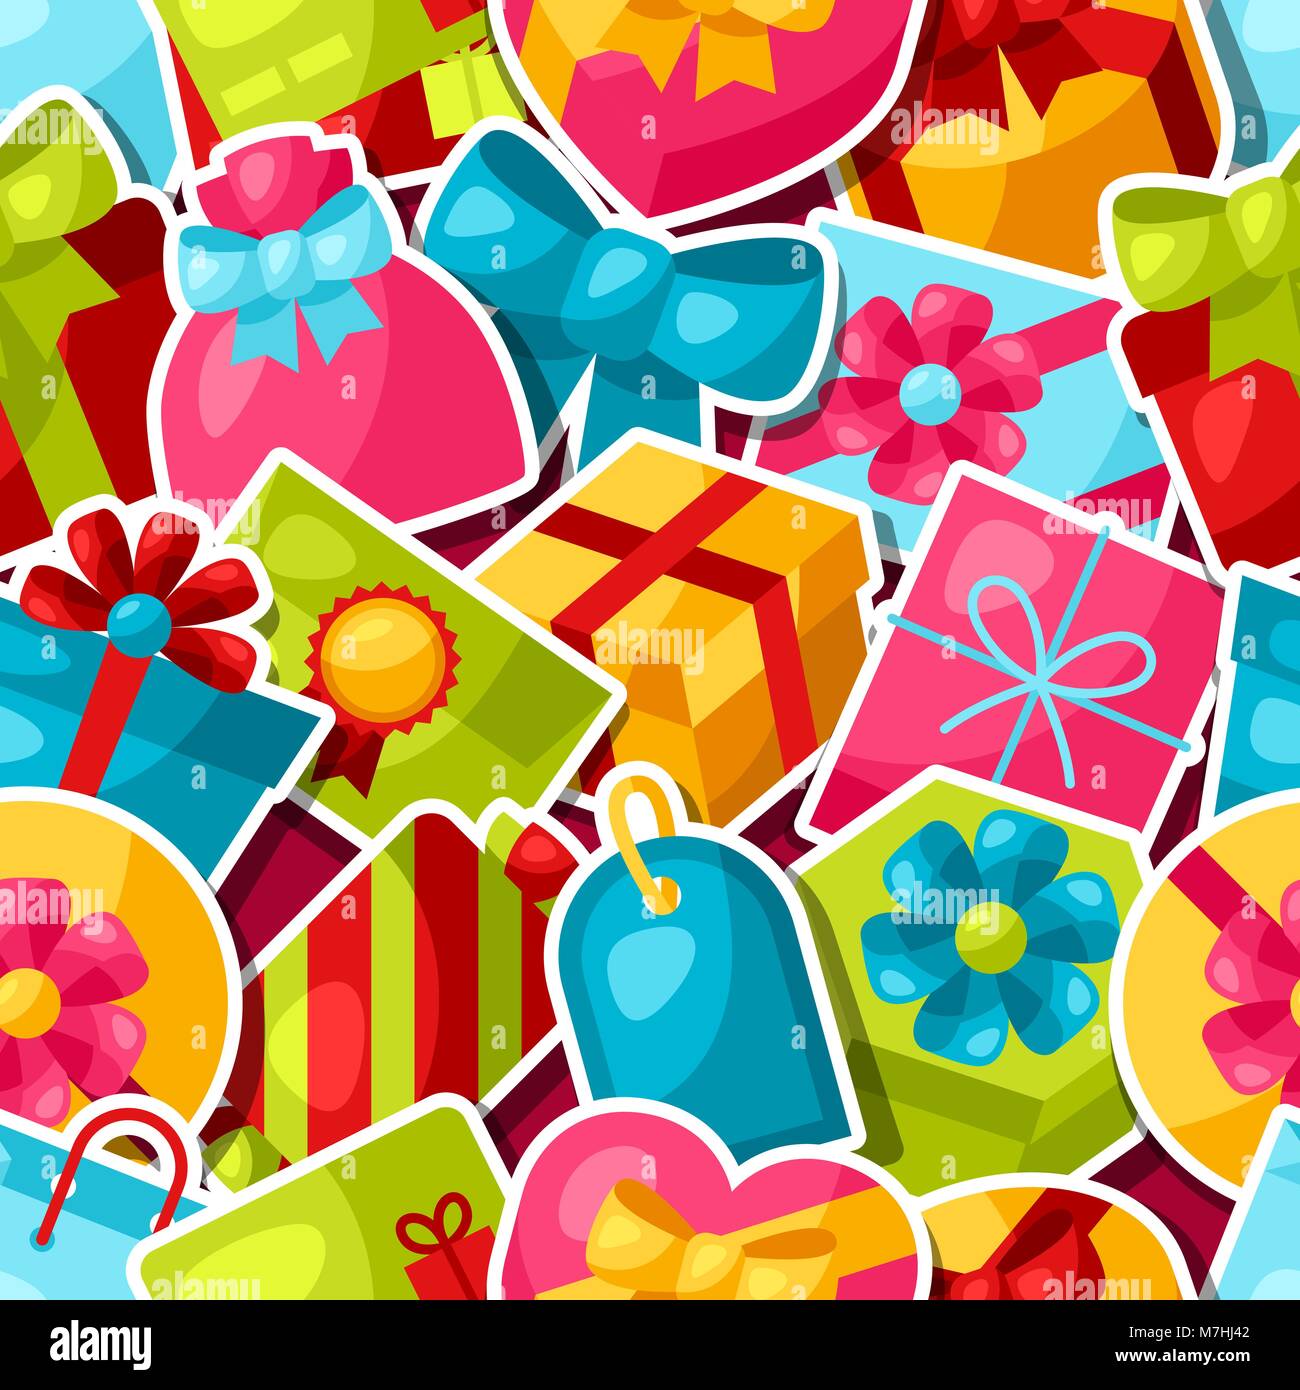 Seamless celebration pattern with colorful sticker gift boxes Stock Vector